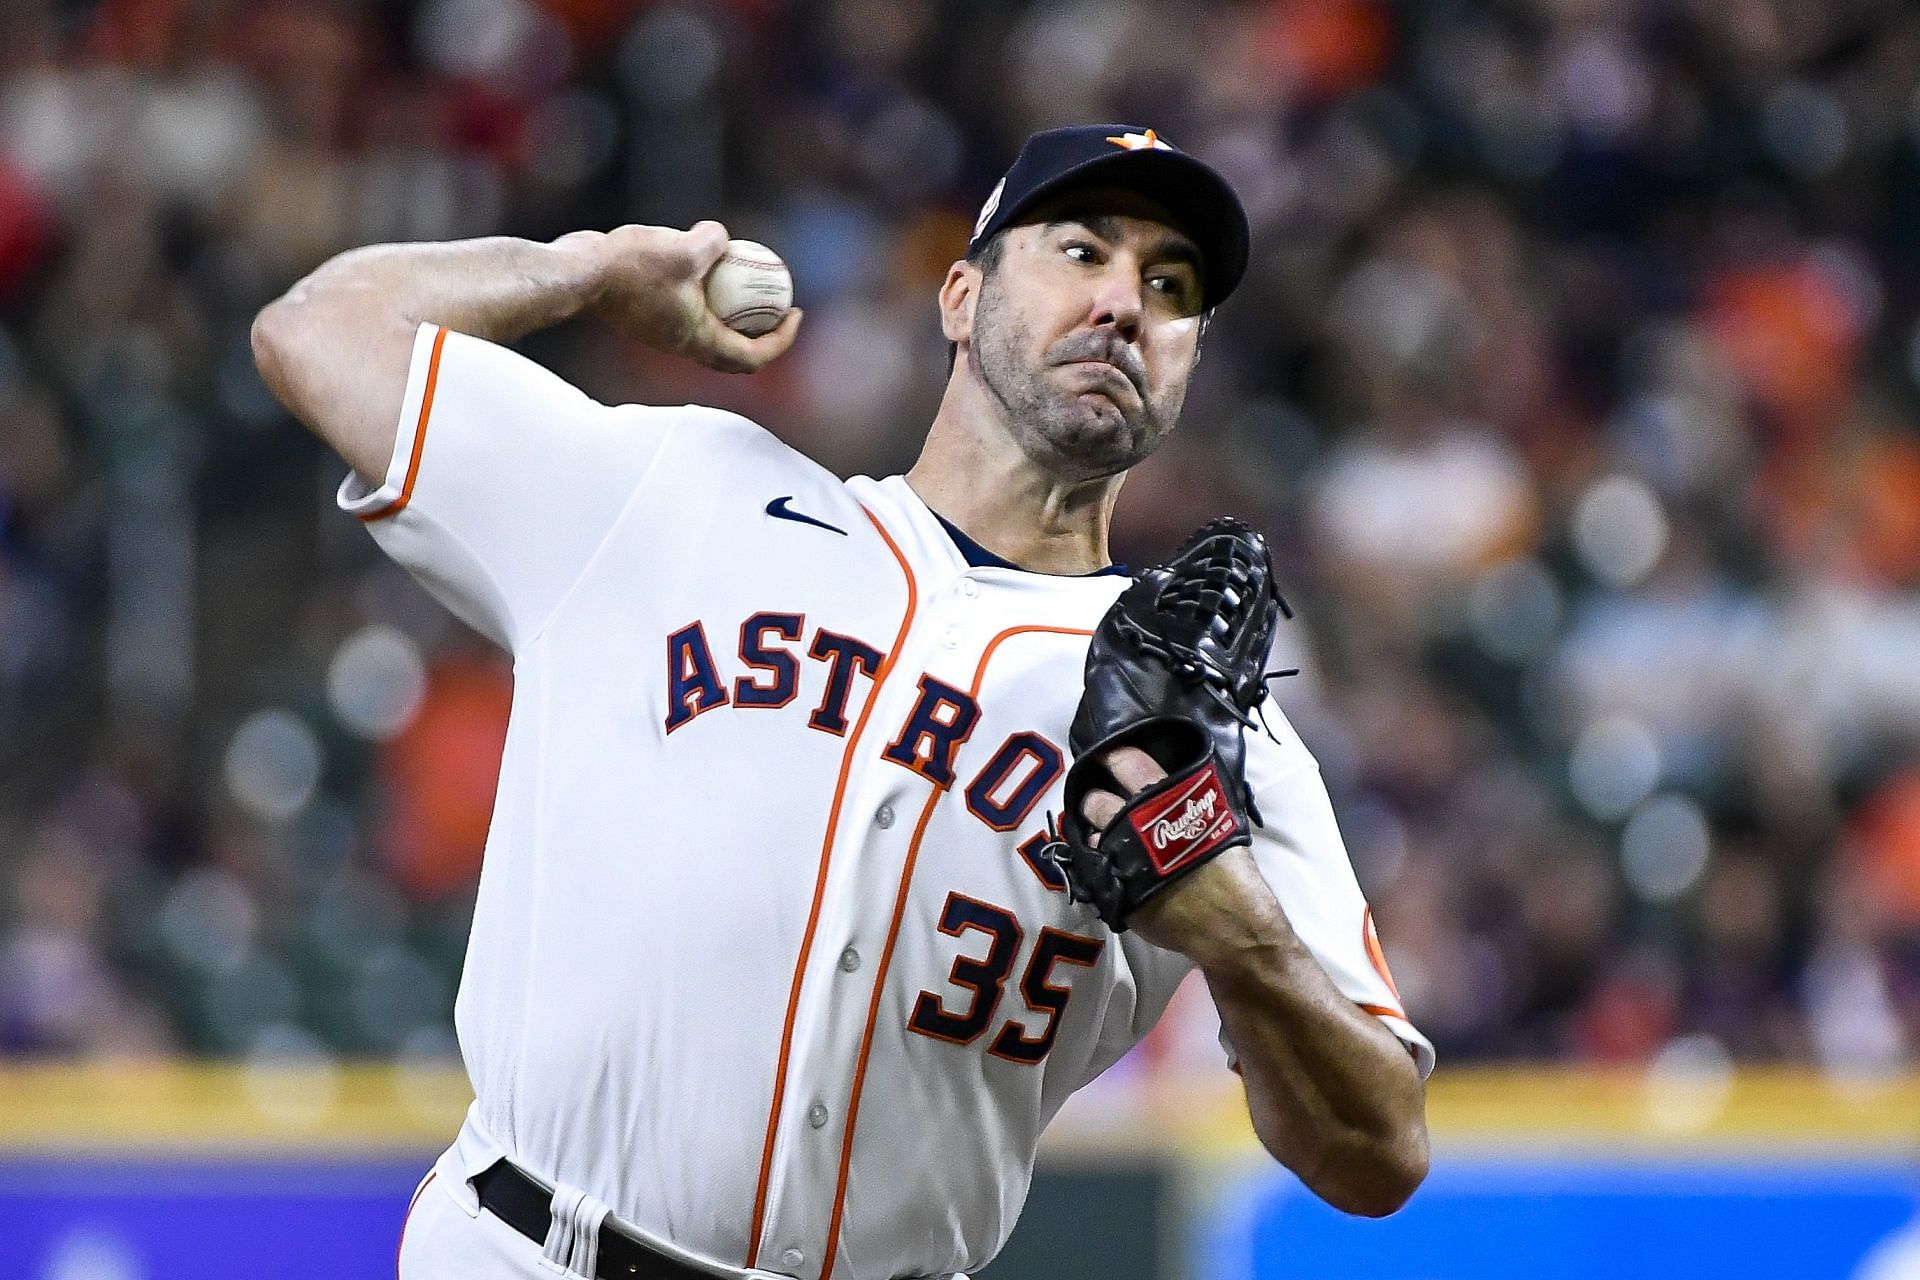 Justin Verlander is having an astonishing season at 39 years with the Astros.